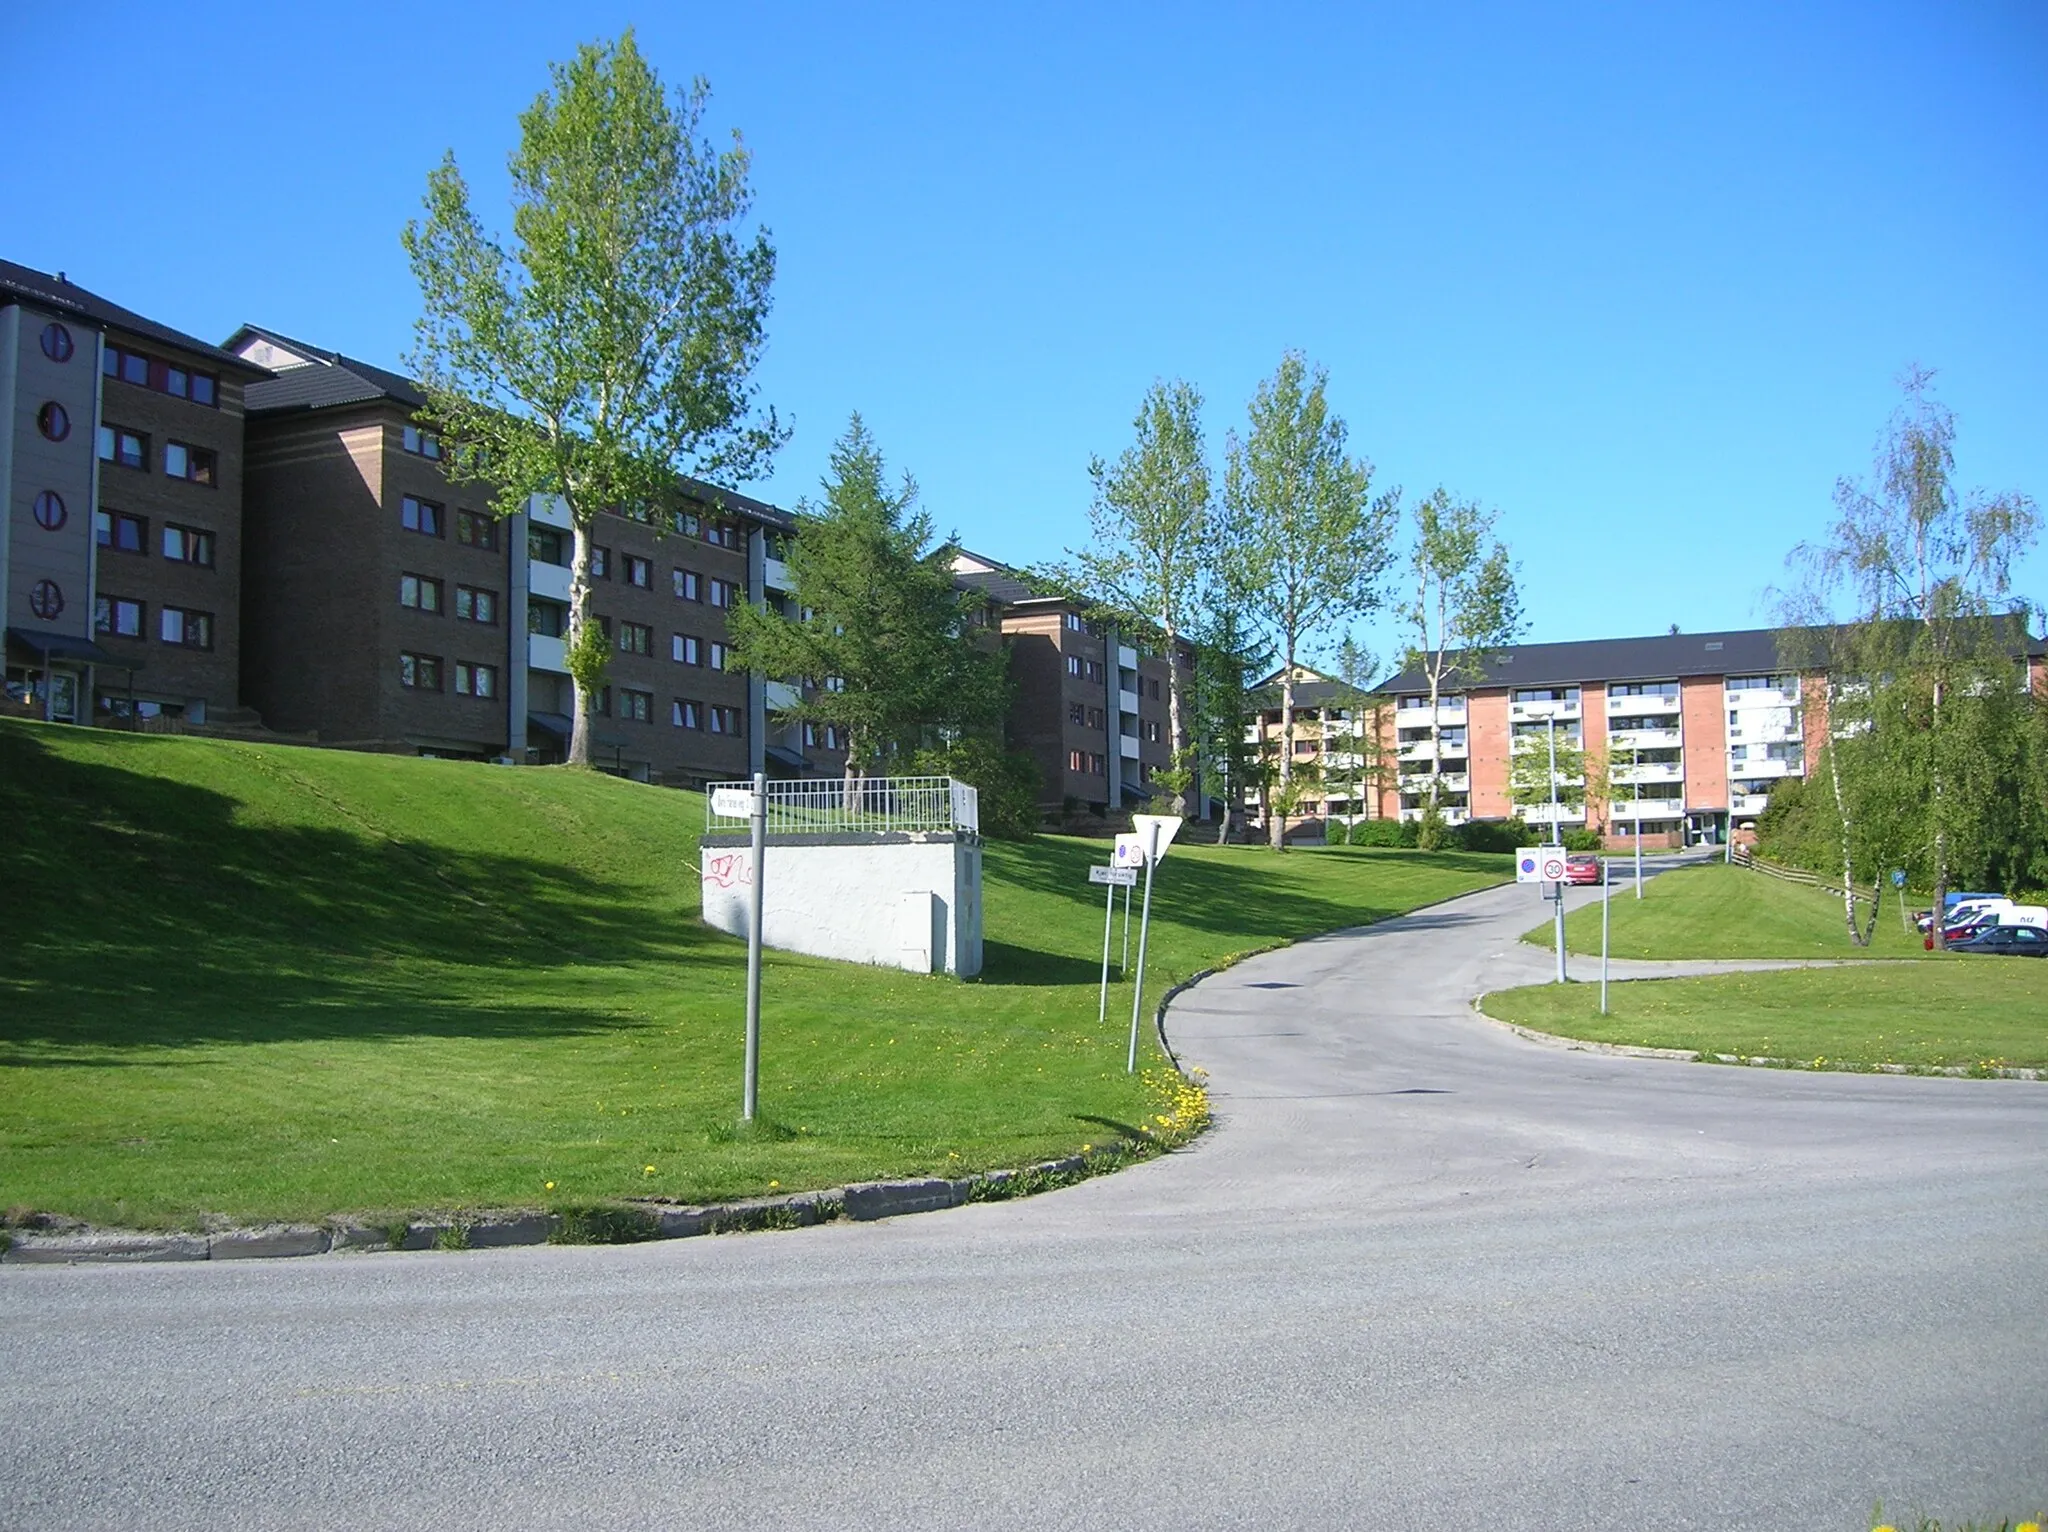 Photo showing: Picture of the blocks of flats at Flatåsen, Trondheim, Norway.